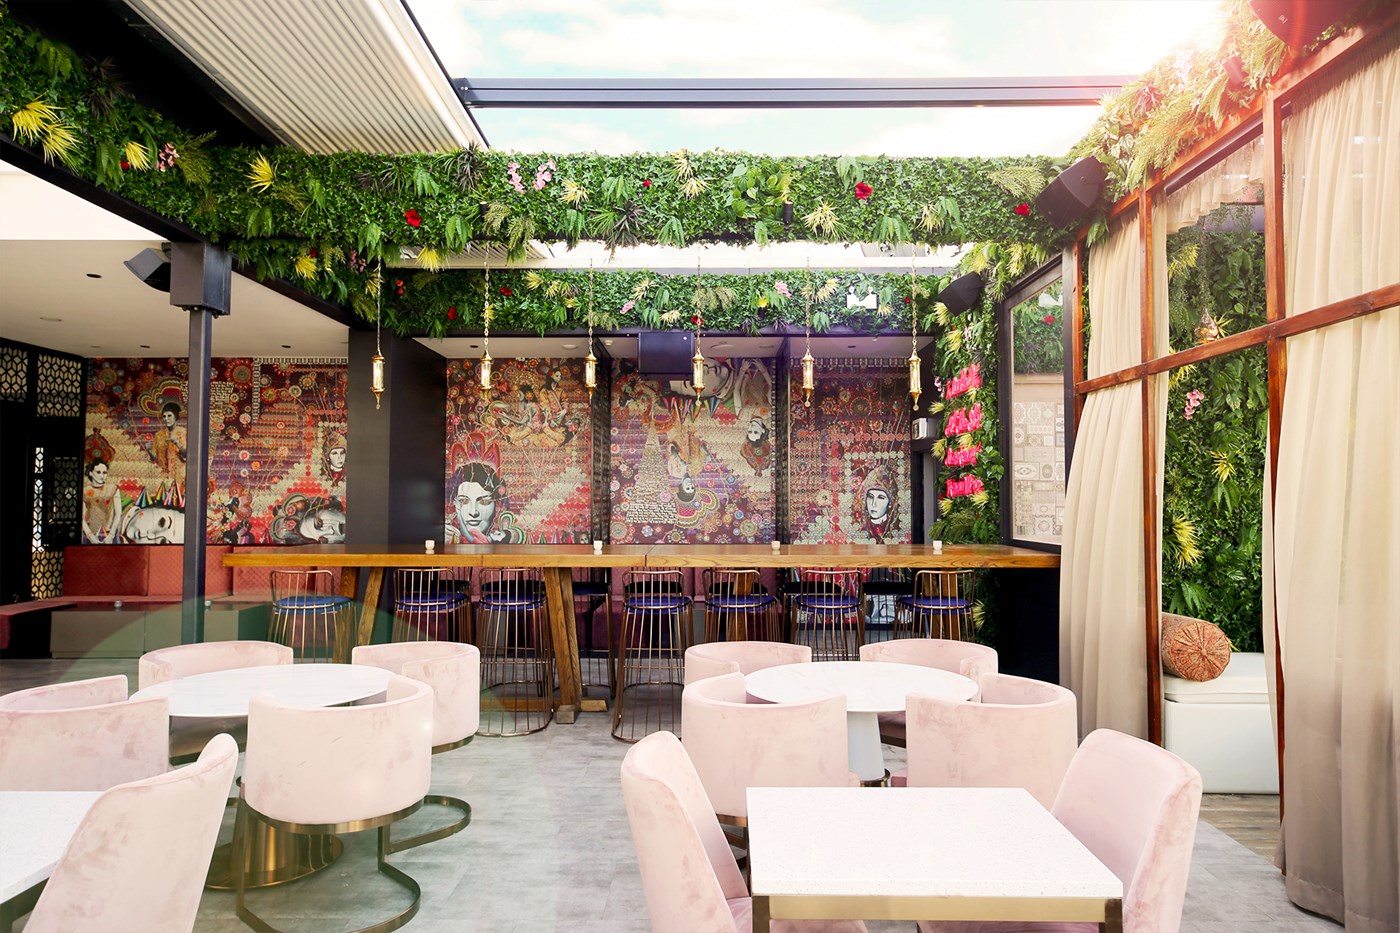 A rooftop bar with blush pink seats, hanging lanterns and curtains.